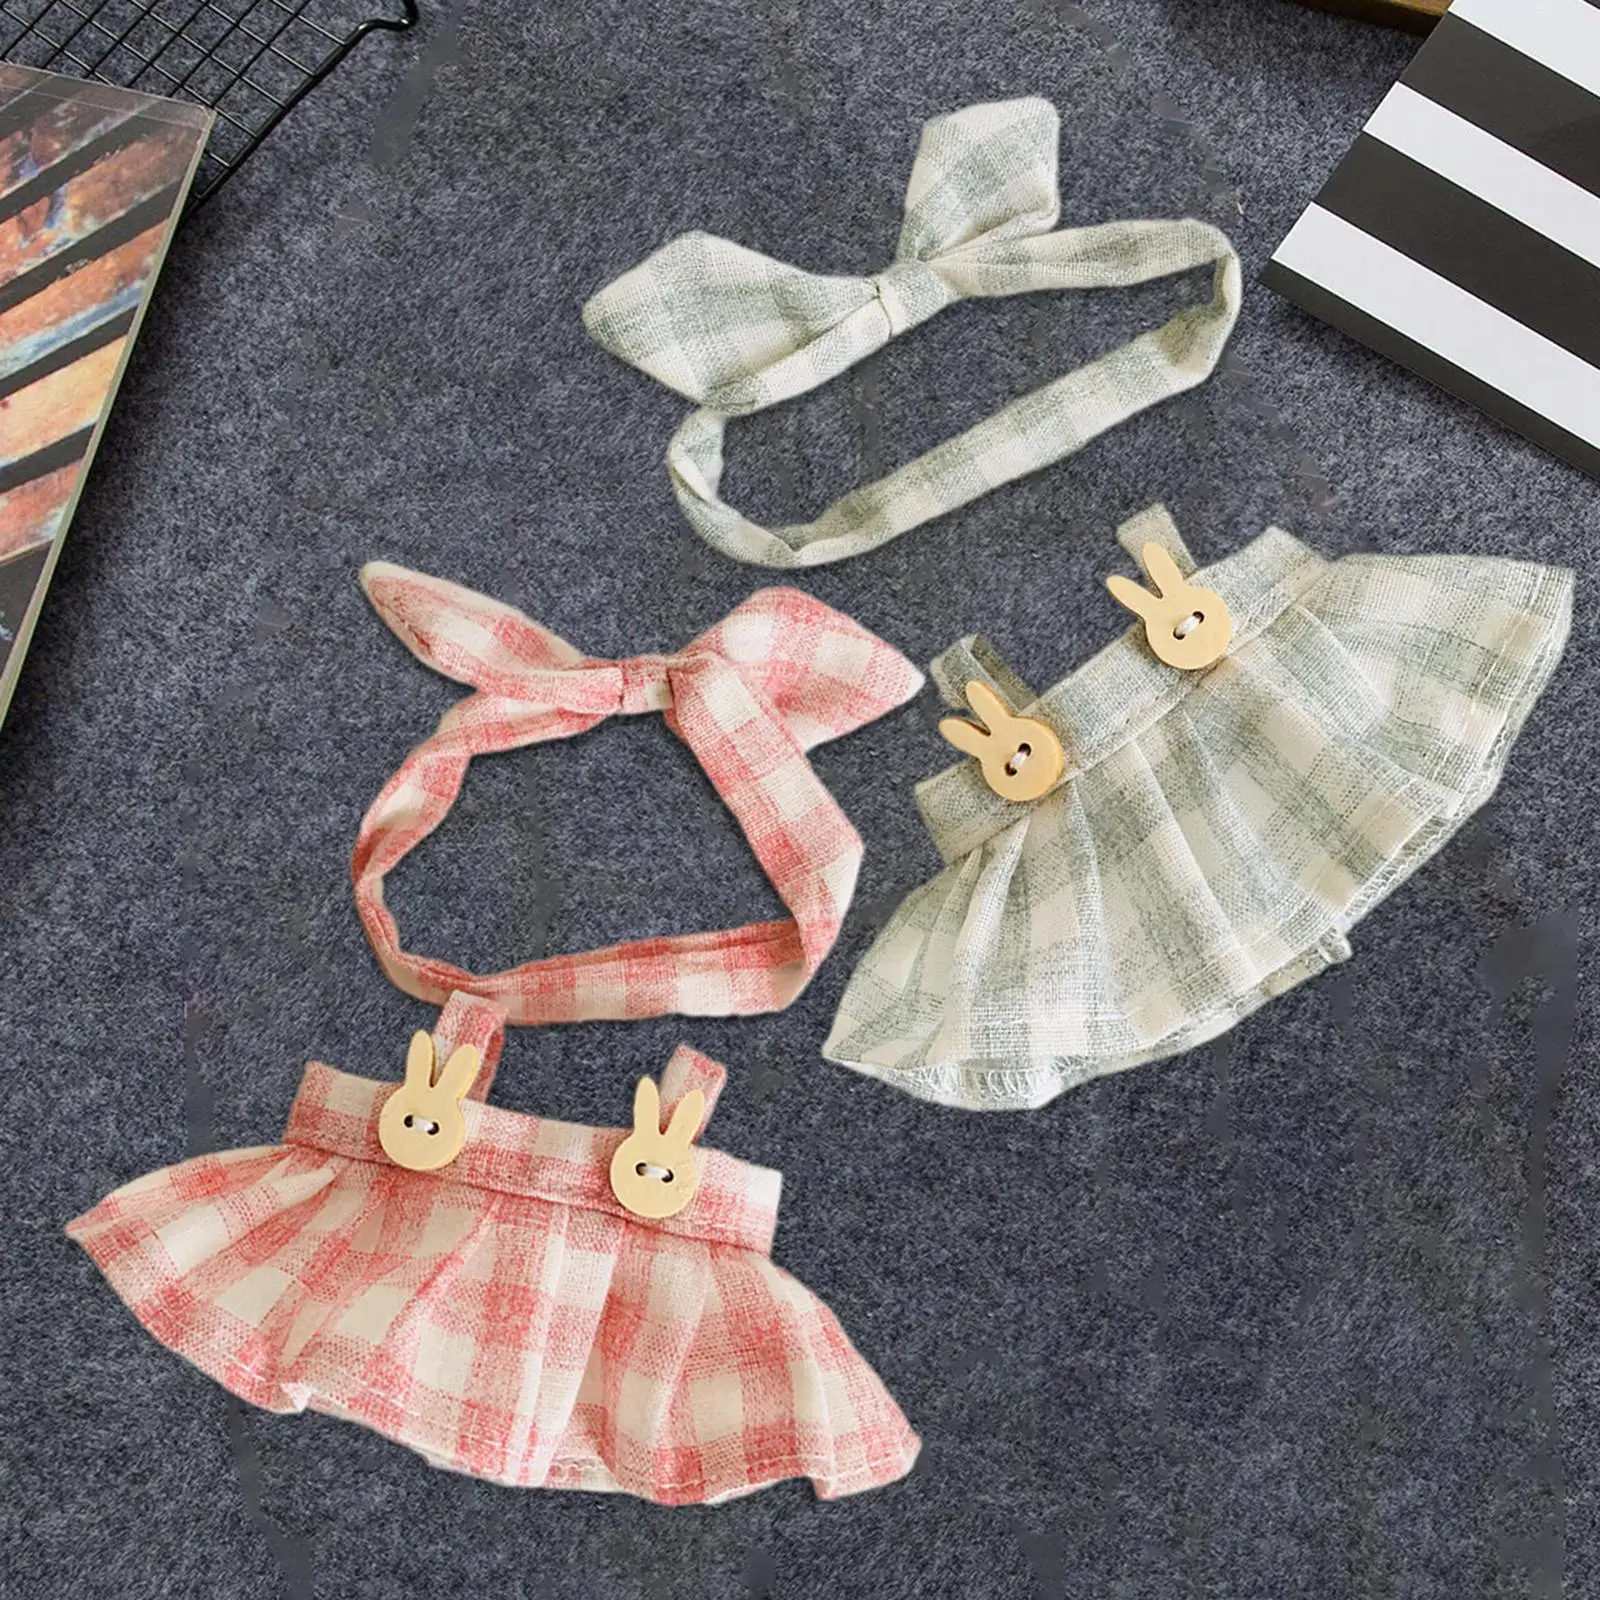 Cute Doll Clothes Suit Fashion Handmade Costumes Dresses Outfit Dress up